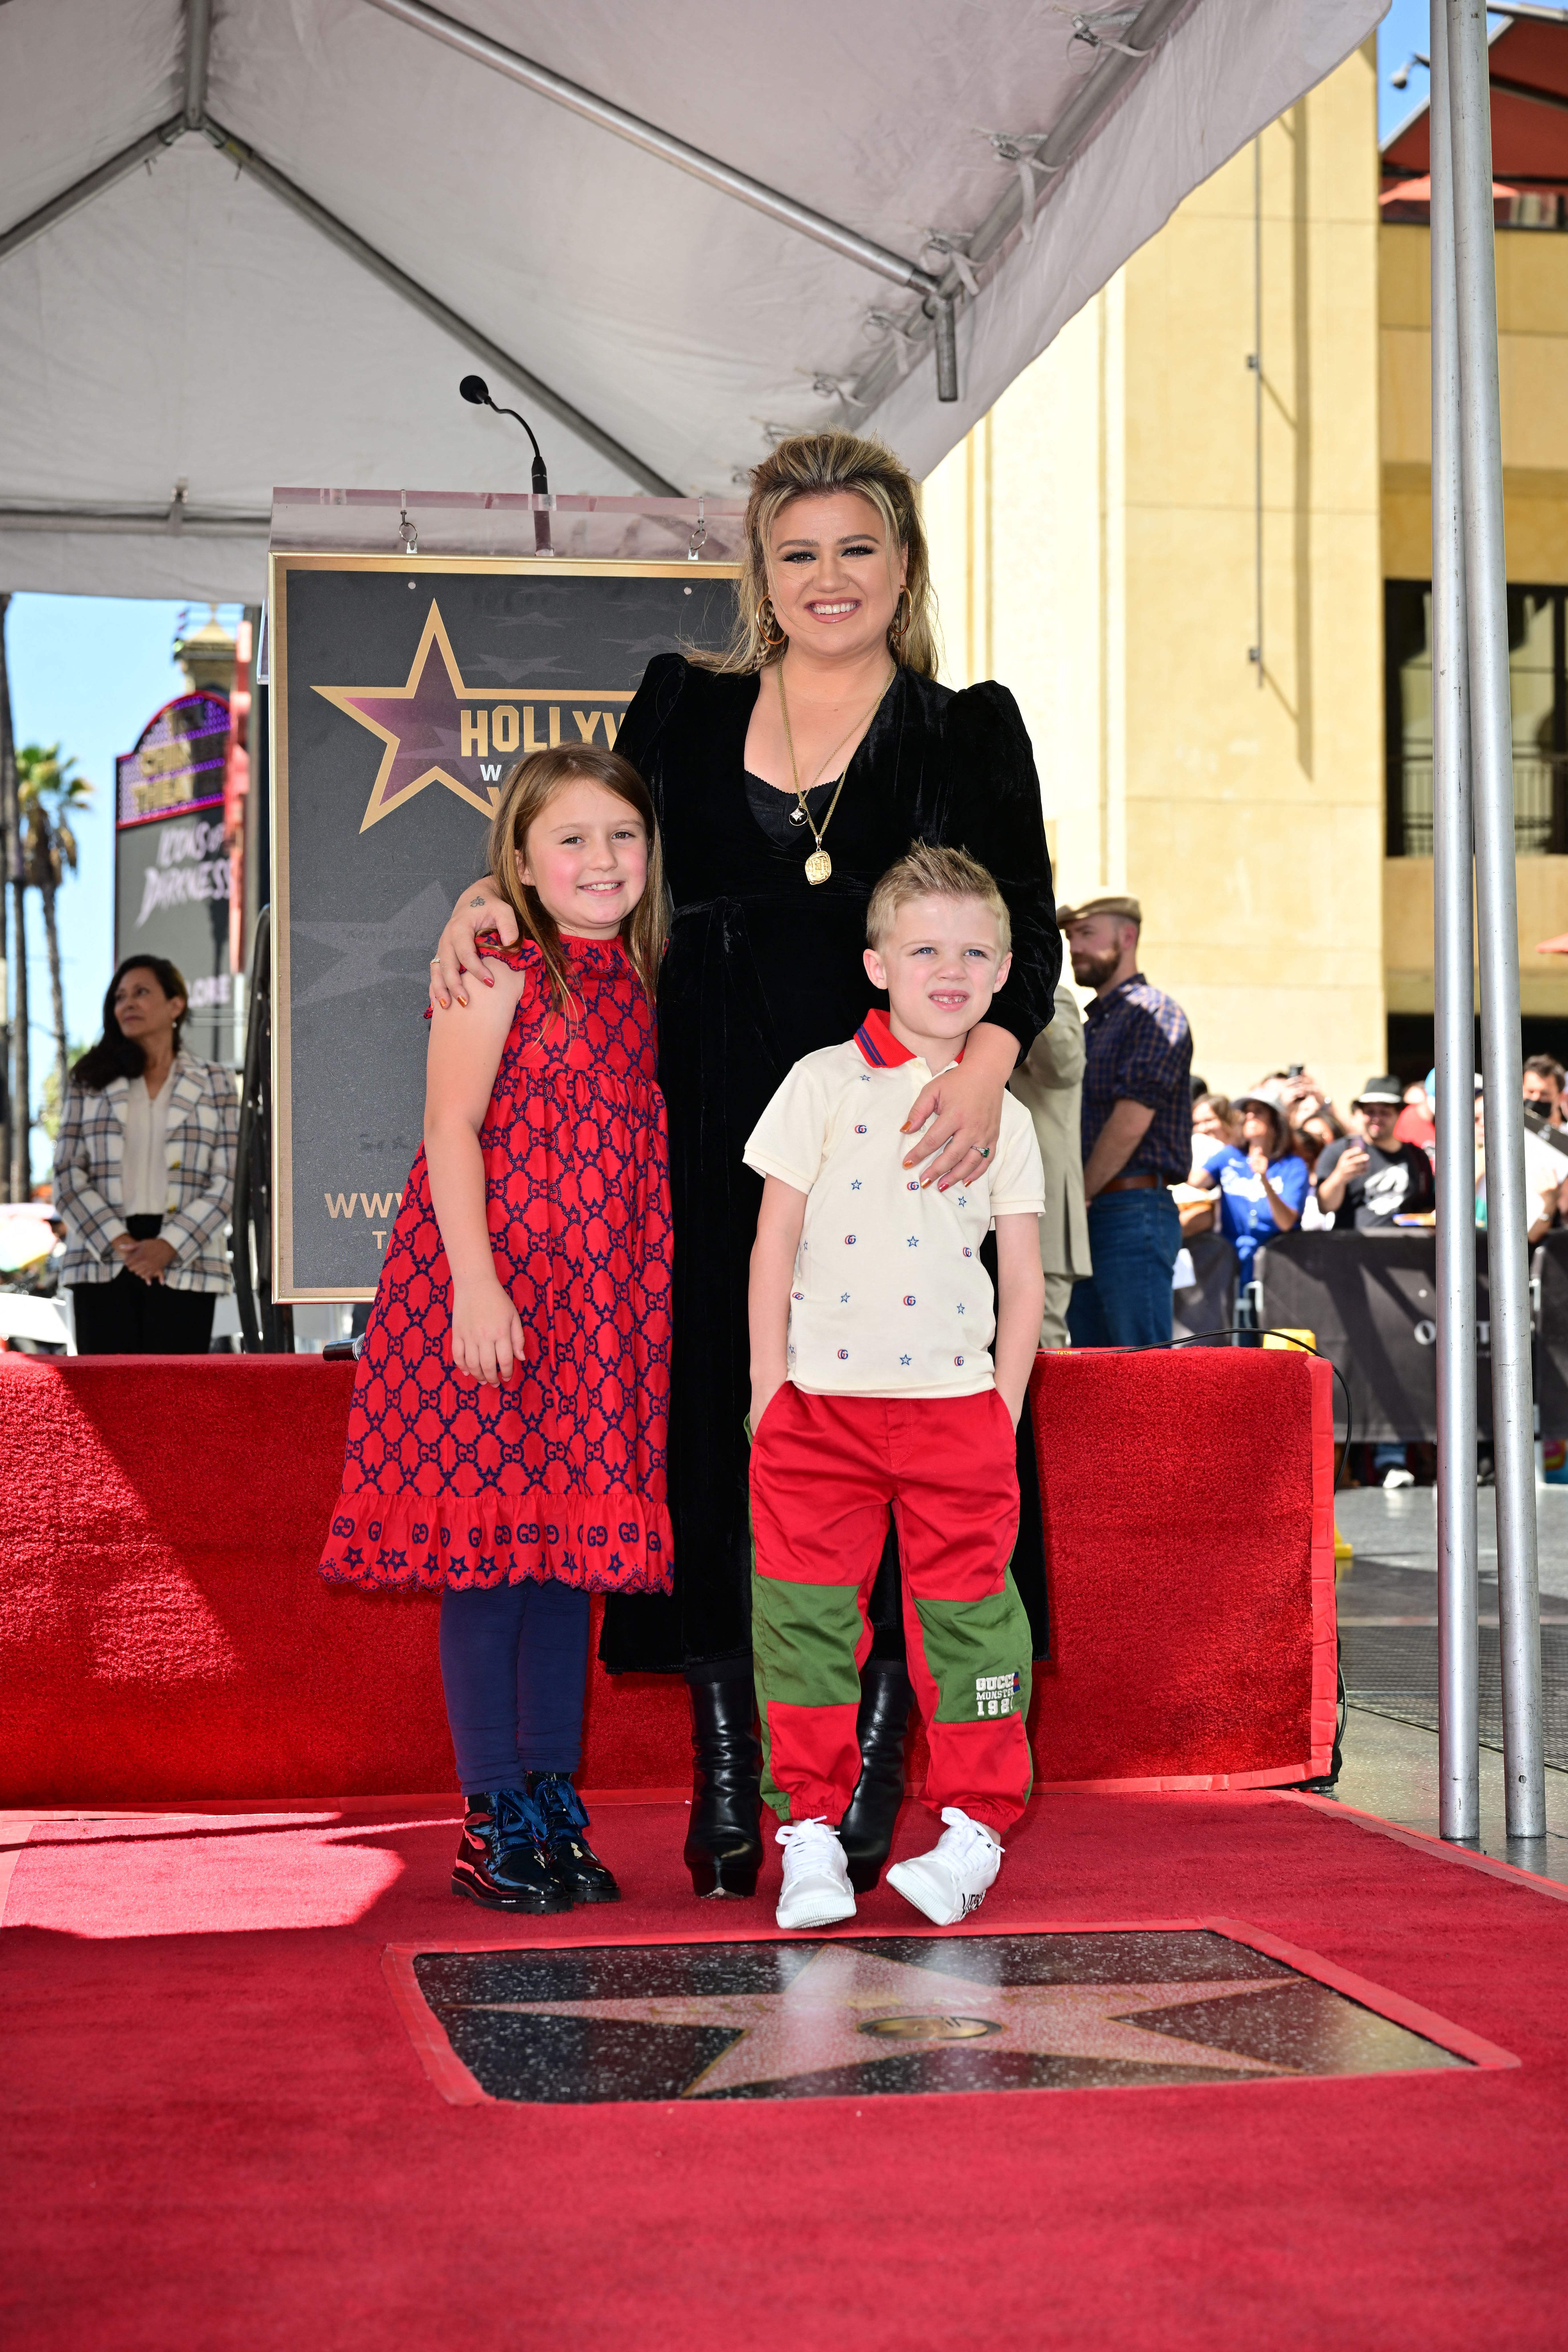 Kelly Clarkson with her kids, River Rose and Remington Blackstock, at her Hollywood Walk of Fame star ceremony in Hollywood, California on September 19, 2022 | Source: Getty Images